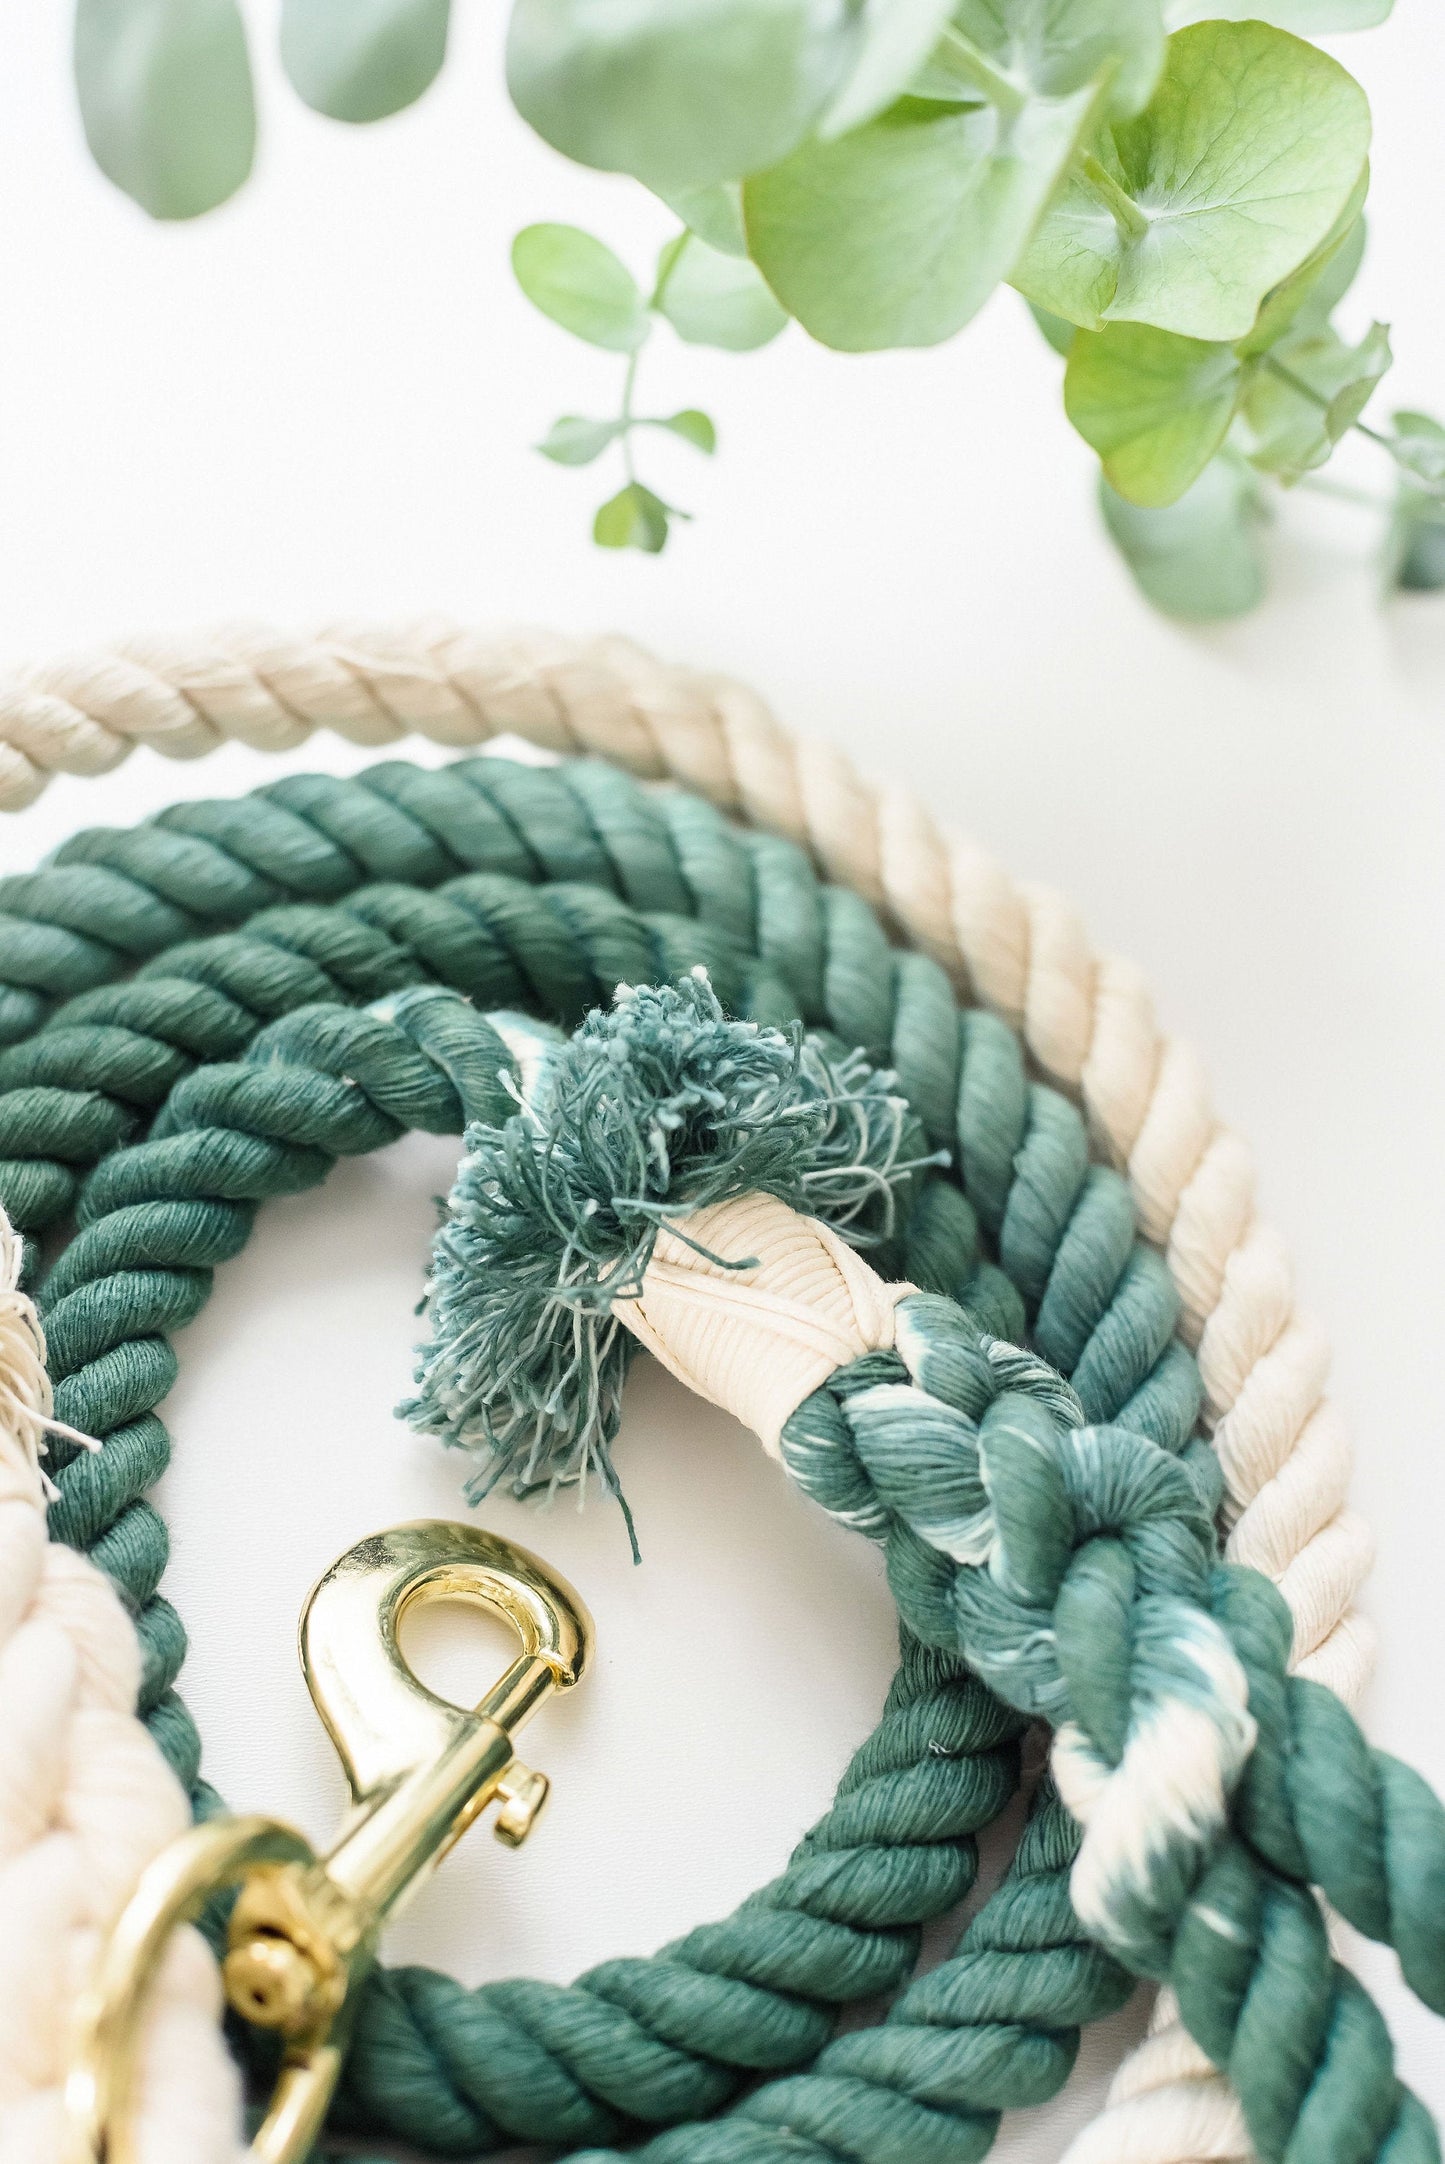 Ombré Green Cotton Rope Leash - Cute Leash - Dog Gift - Gift for Her - Pet Birthday Gift - Dog Accessory - Dog Lover Gift - Wedding Leash